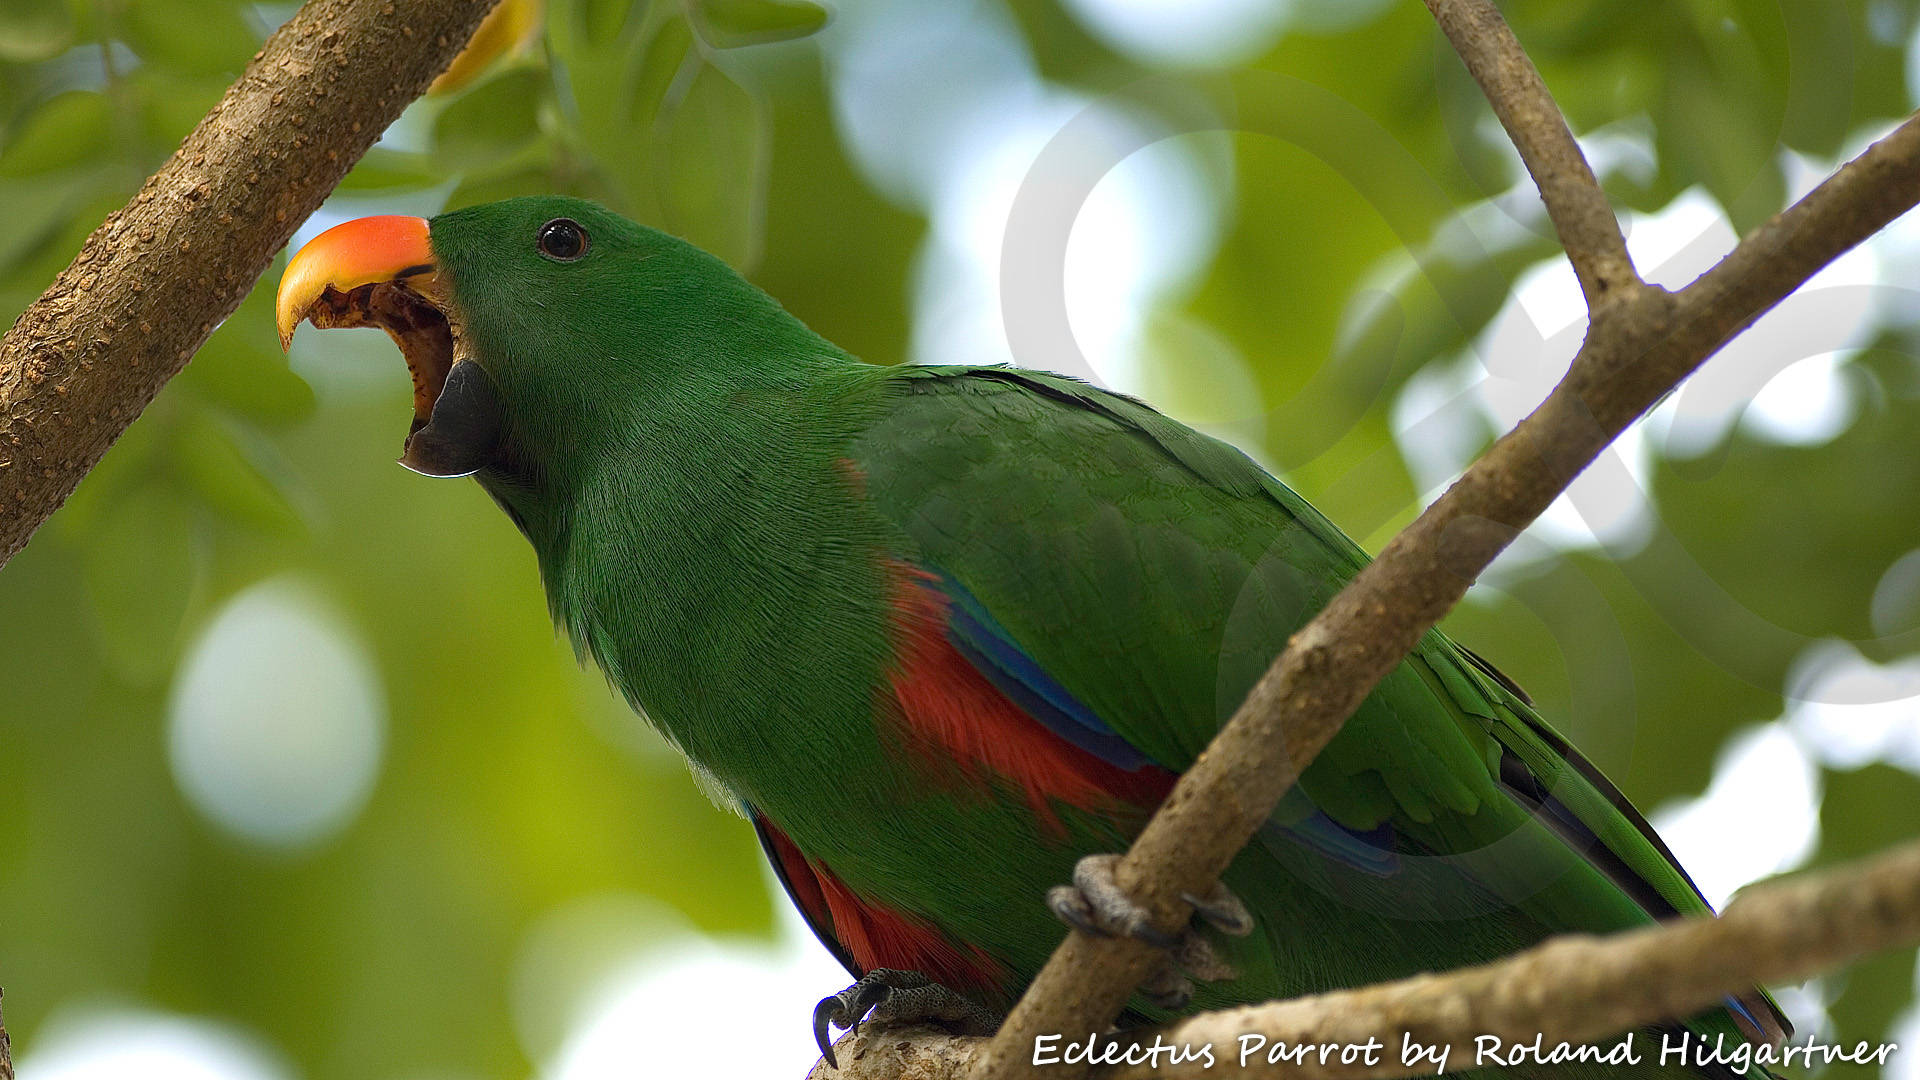 Papuan Eclectus Eclectus polychloros is widely distributed throughout the lowland forests of the New Guinea region. Copyright © Roland Hilgartner